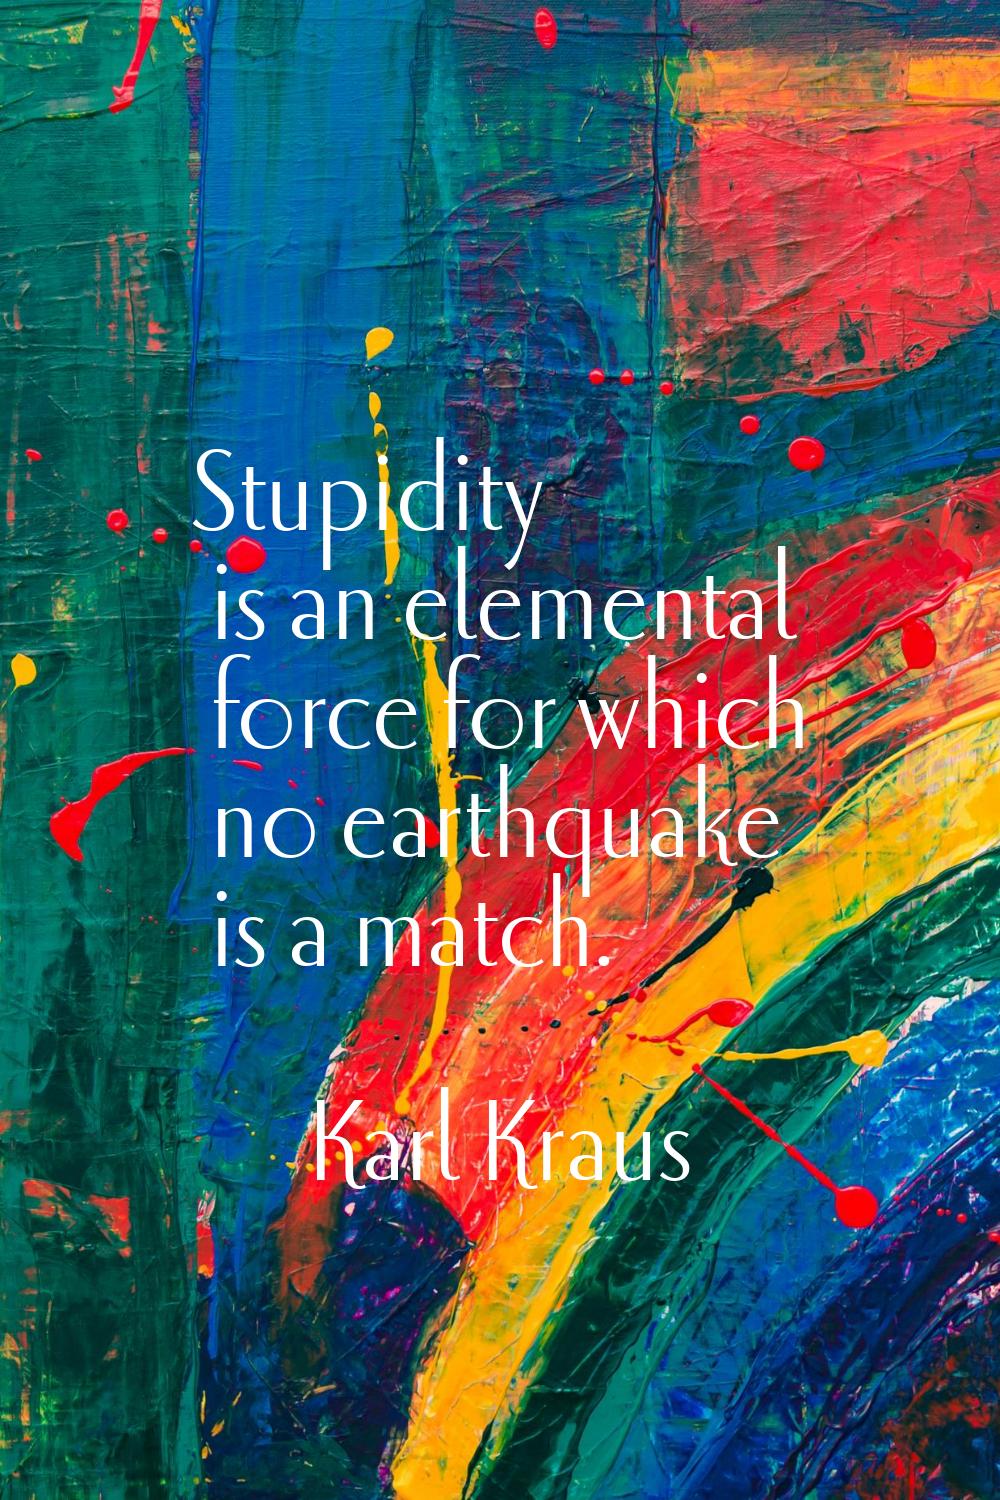 Stupidity is an elemental force for which no earthquake is a match.